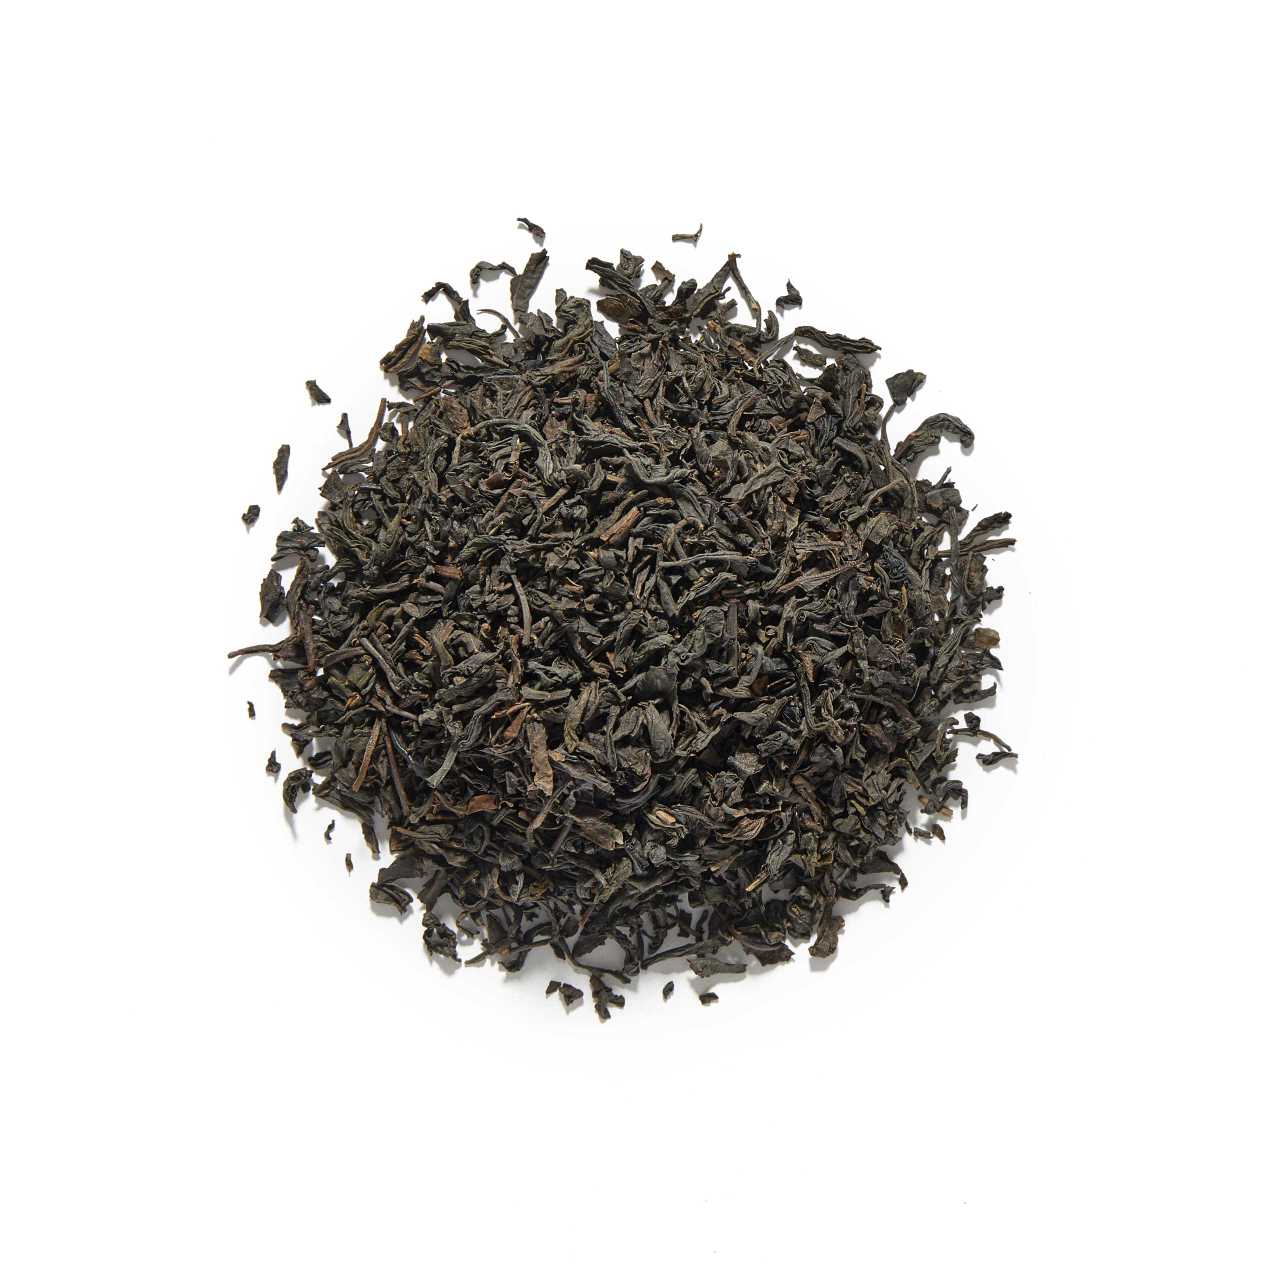 Tarry Lapsang Souchong Loose Leaf Tea arranged in a circle